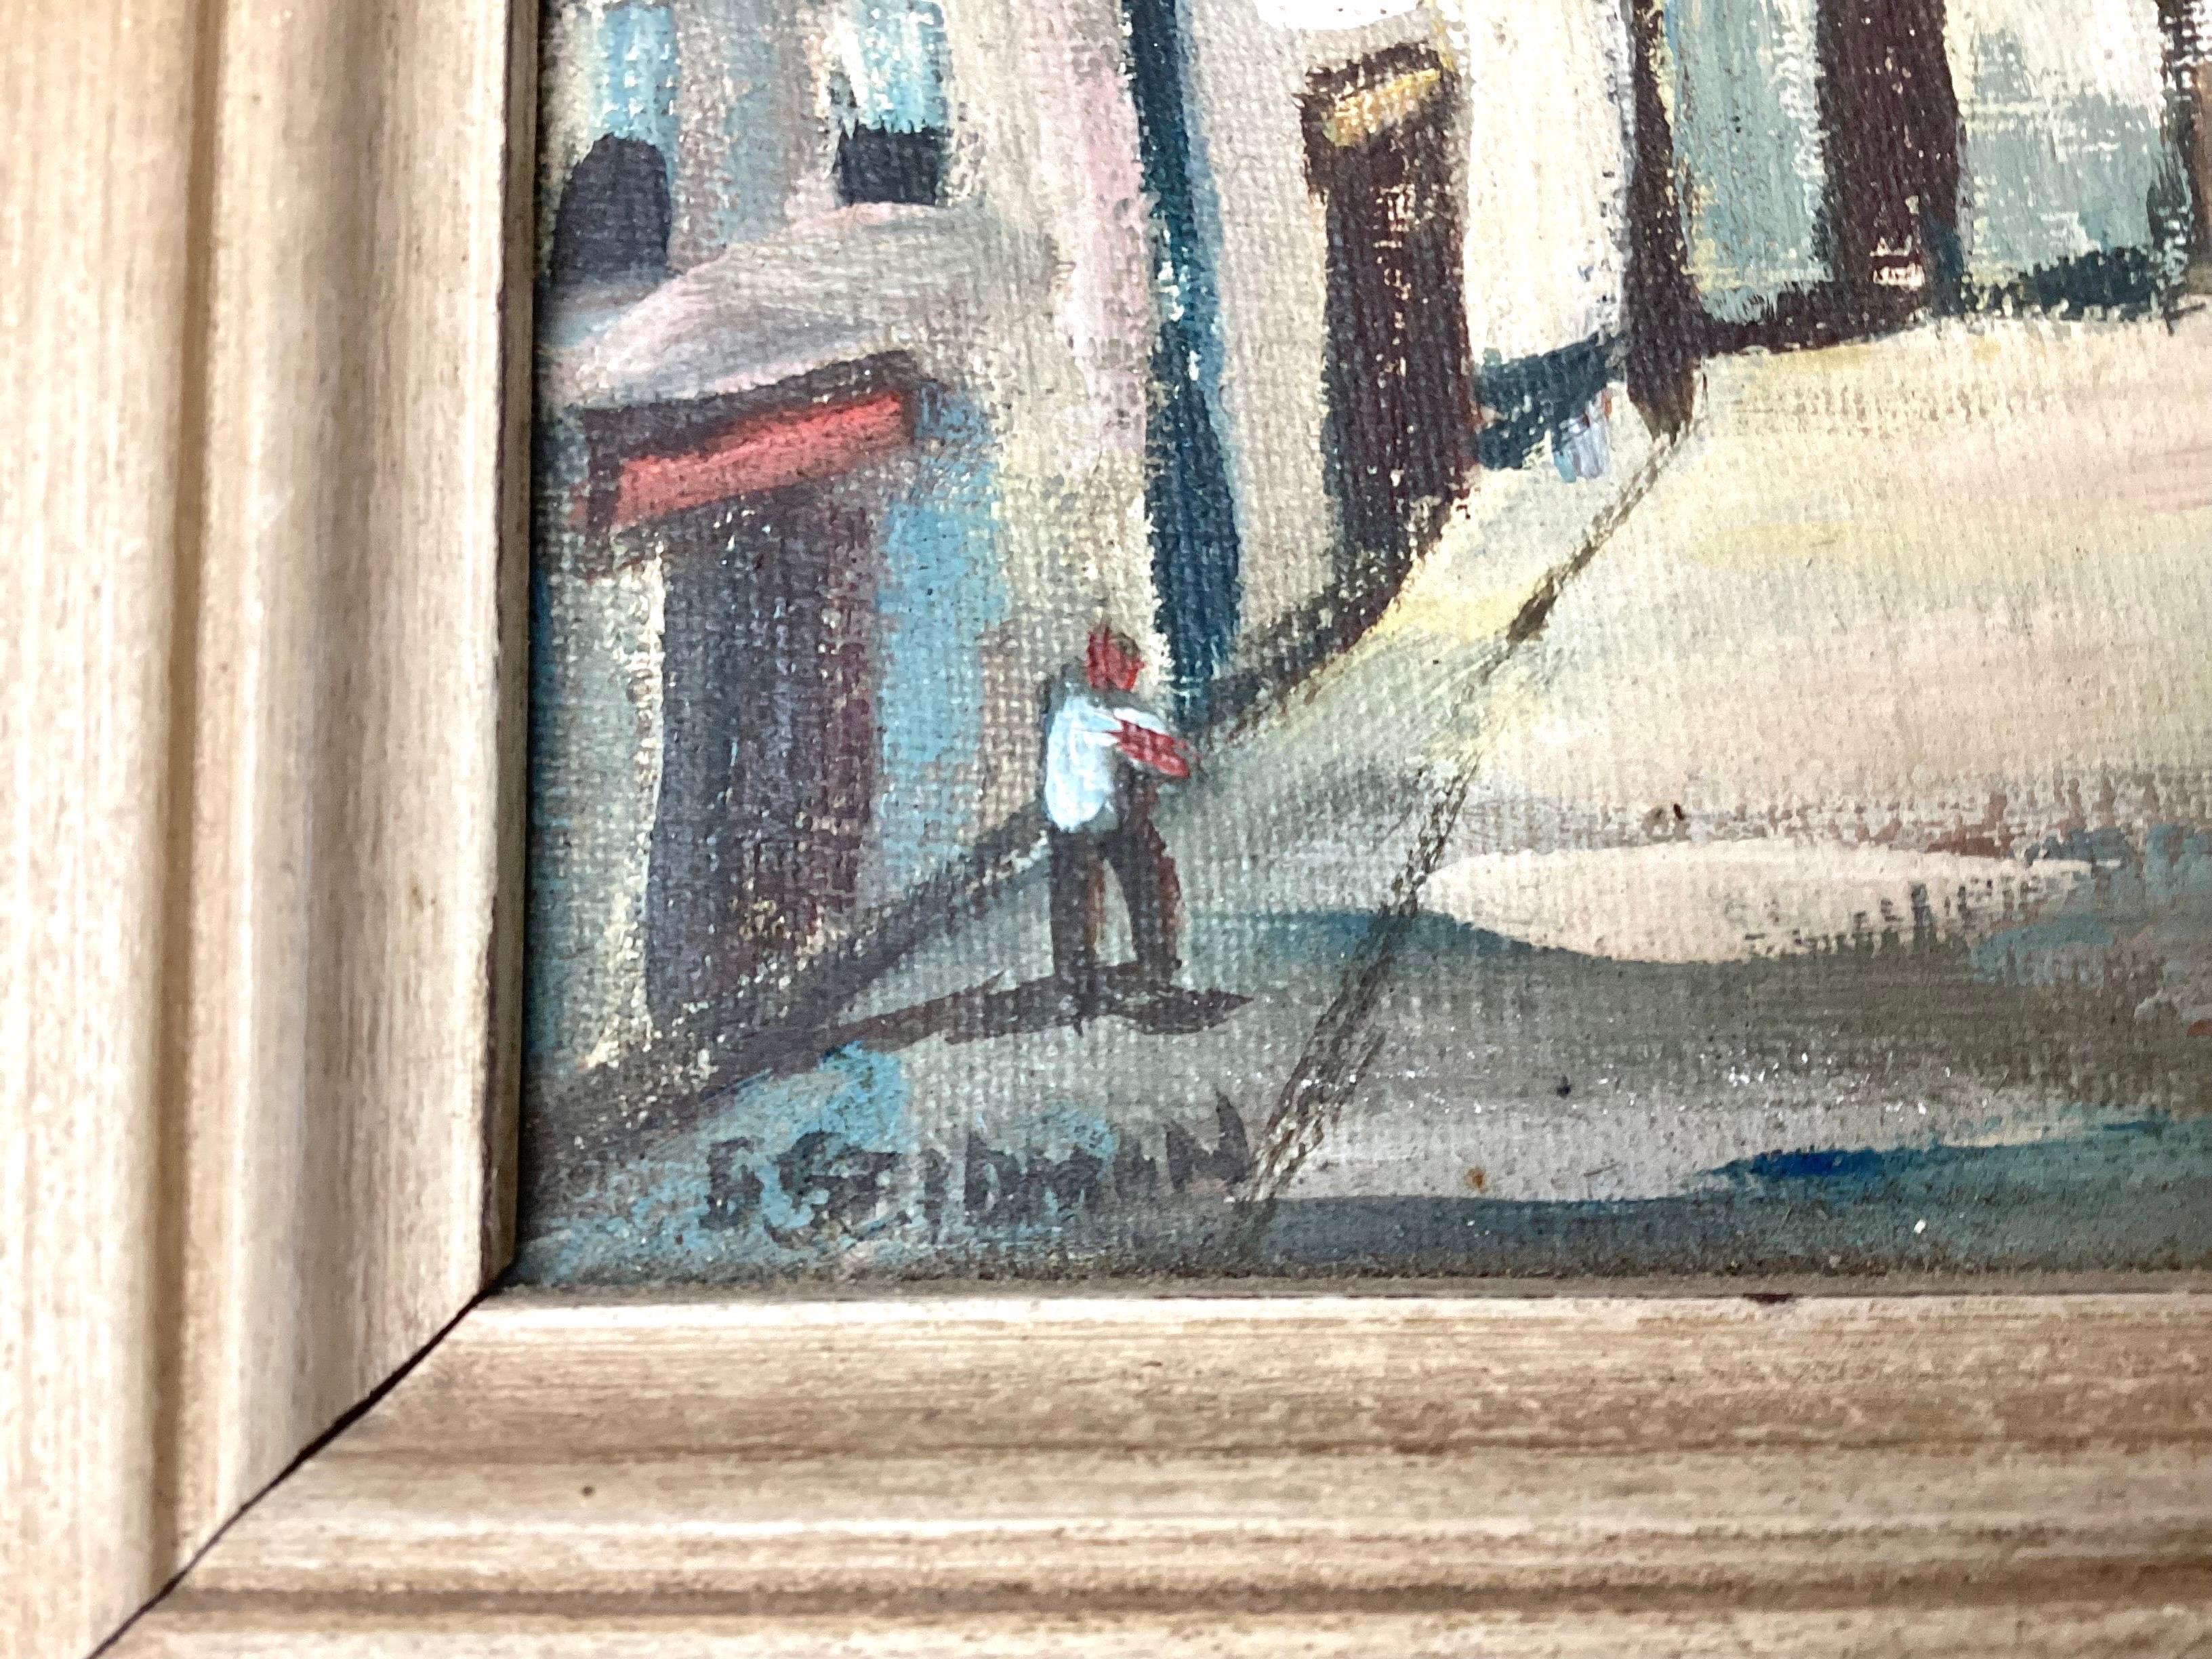 Mid century George Seidman oil painting on board. This is a nice small piece. Frame size 7 3/4 by 7 3/4